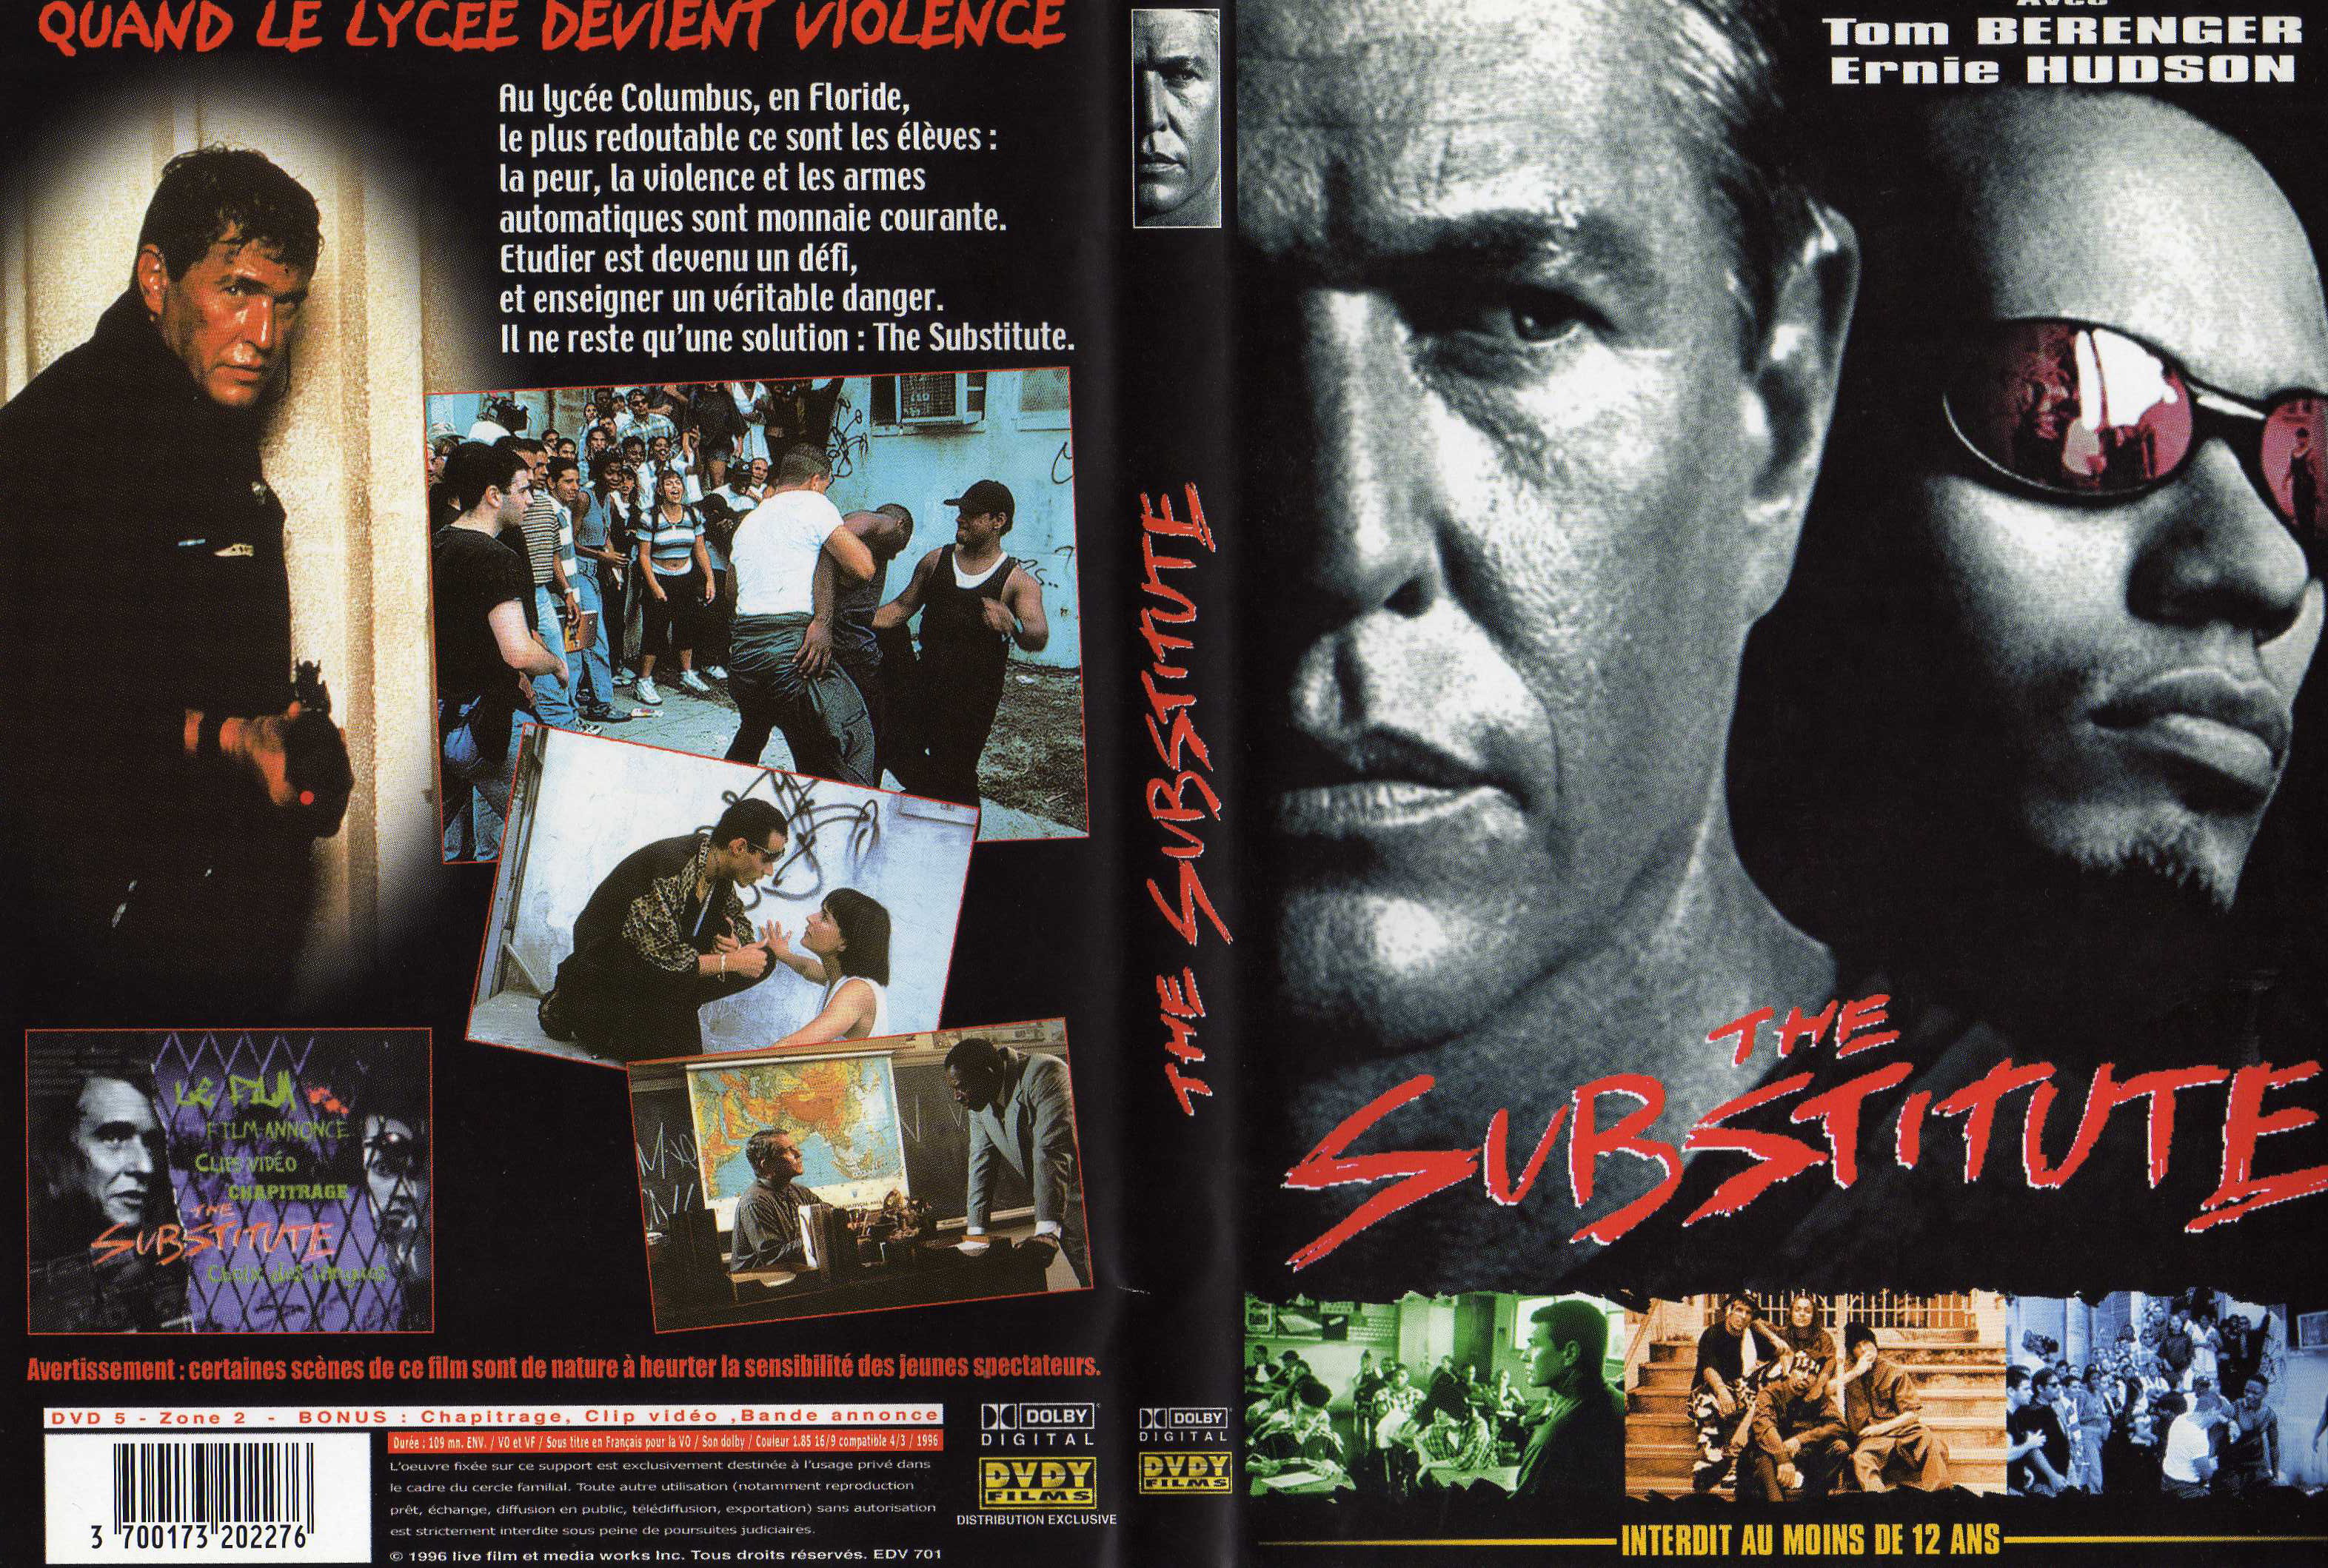 Jaquette DVD The substitute